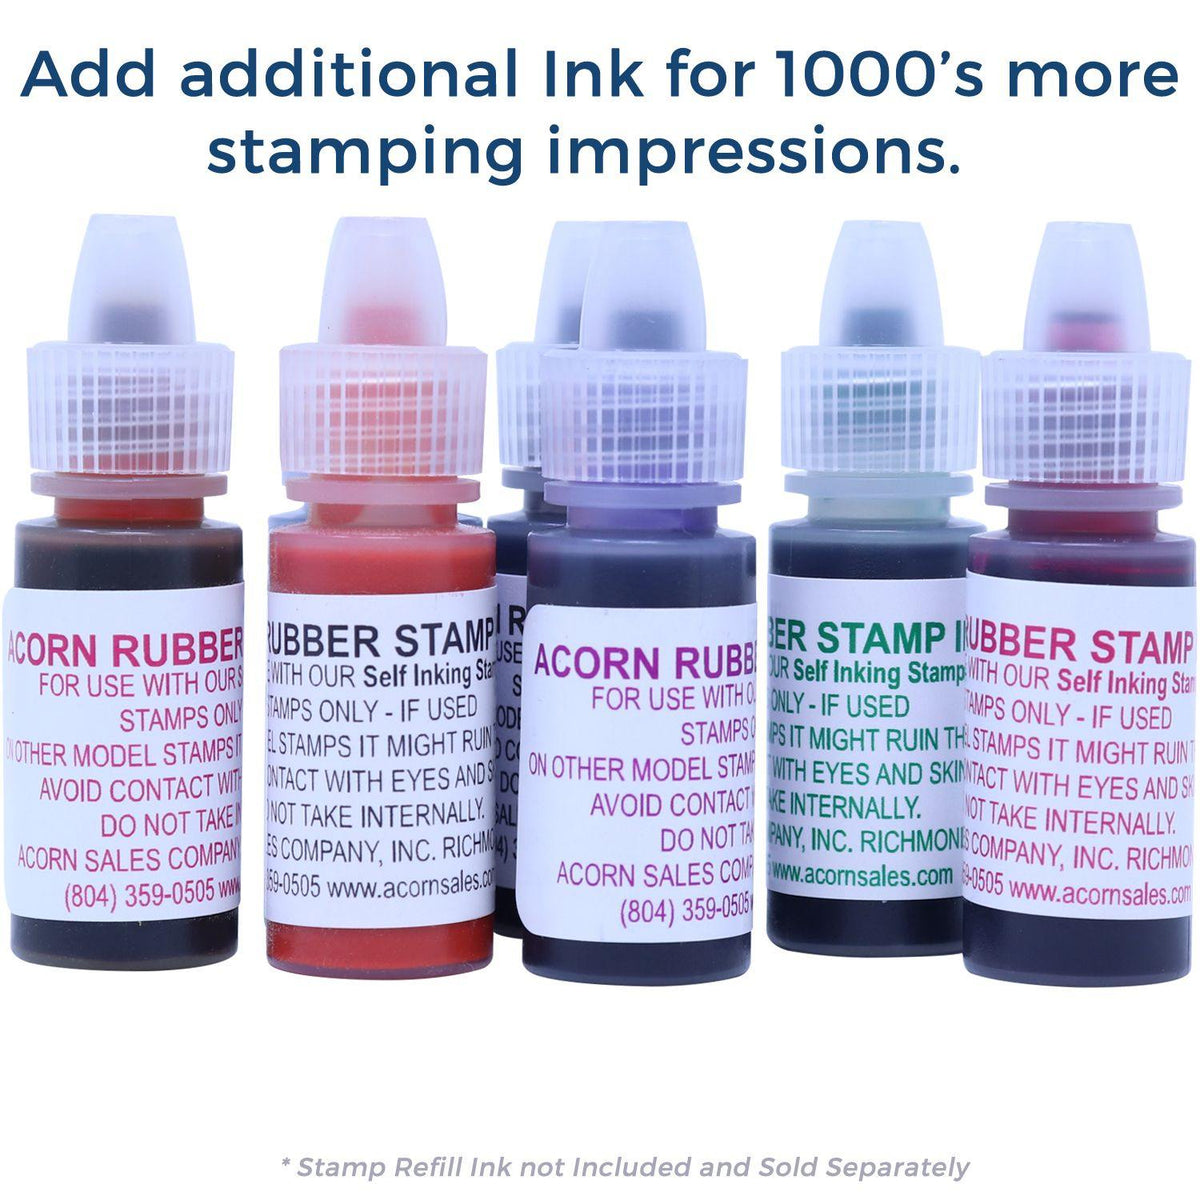 Refill Inks for Large Pre-Inked Please Forward Attending Physicians Stamp Available